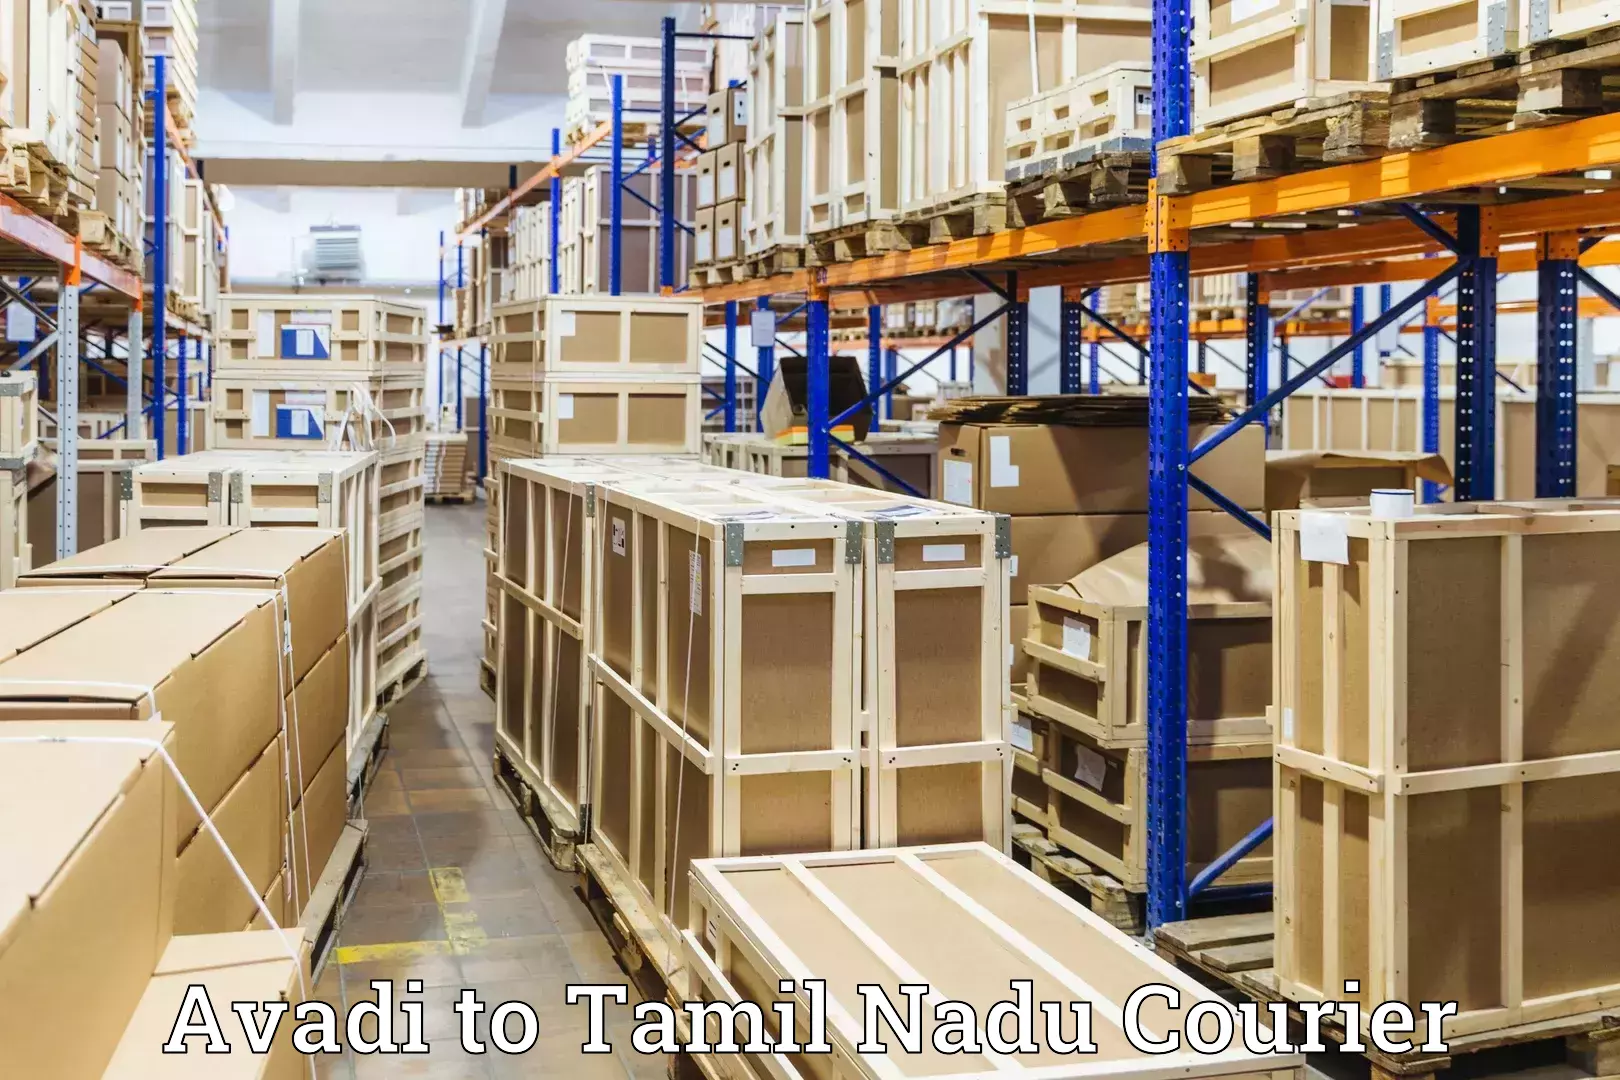 Holiday season luggage delivery Avadi to Vellore Institute of Technology